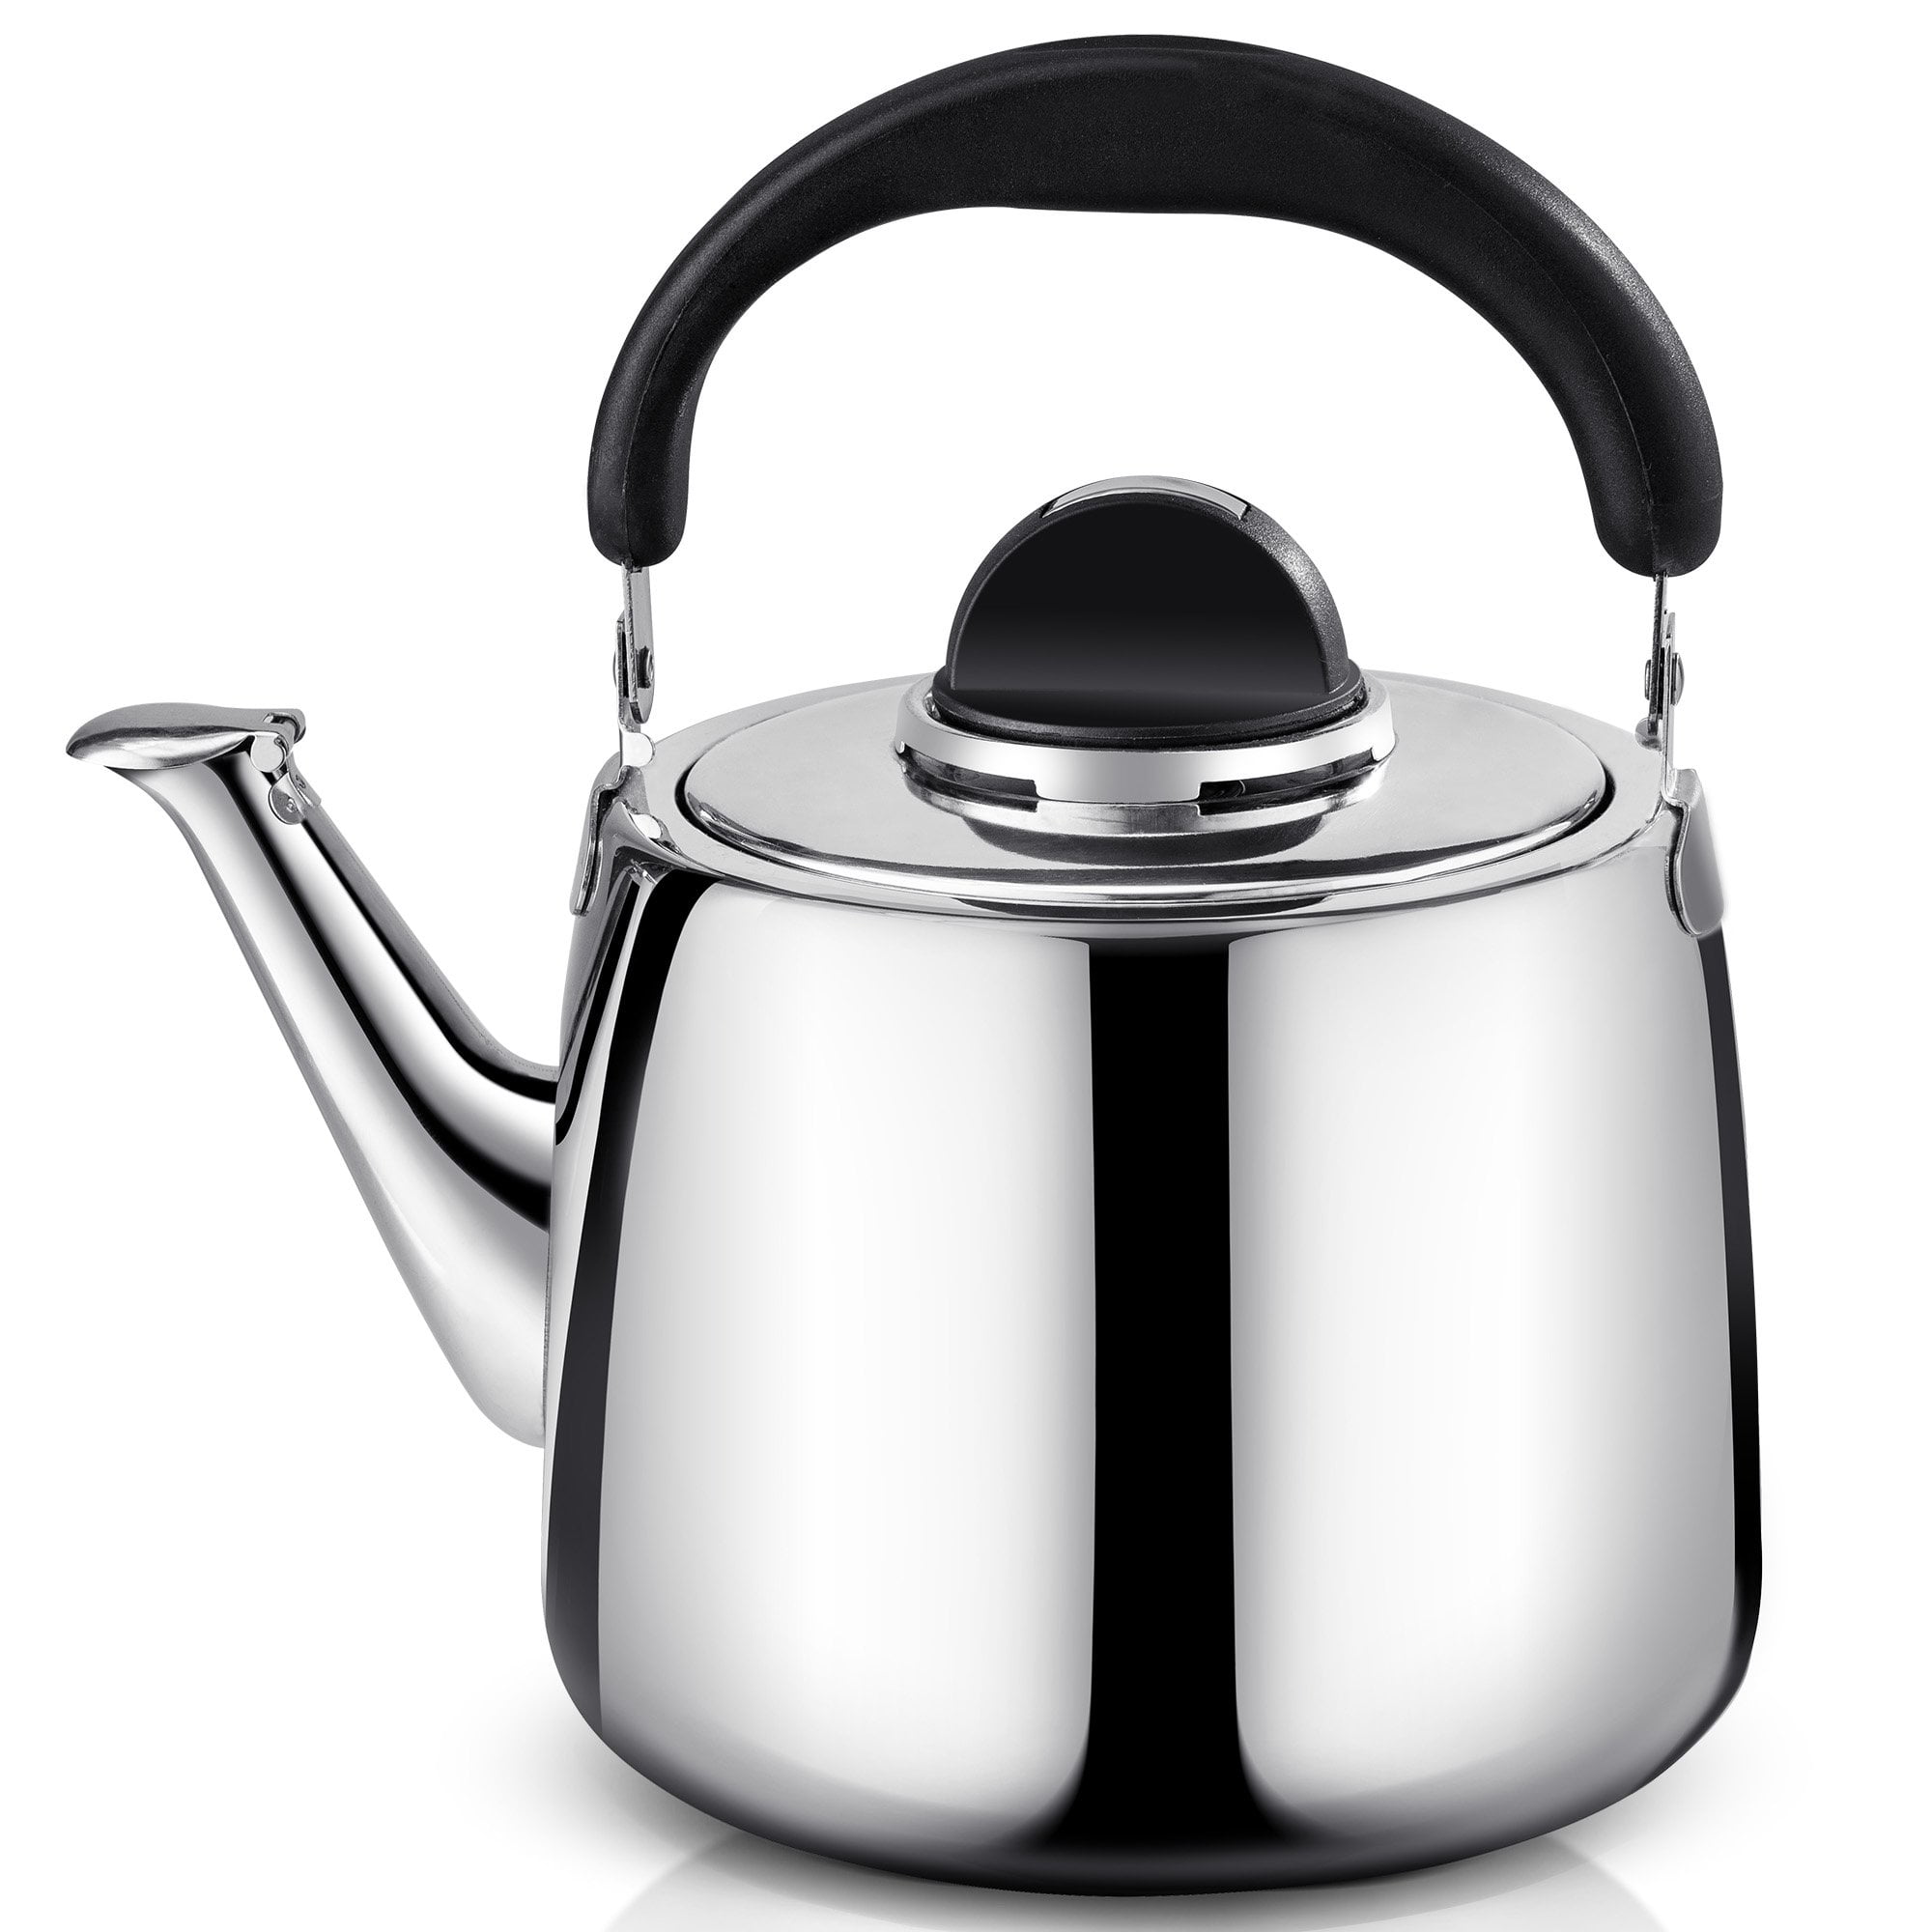 Whistling 3.2L Tea Kettle Stove Top Teapot Stainless Steel Water